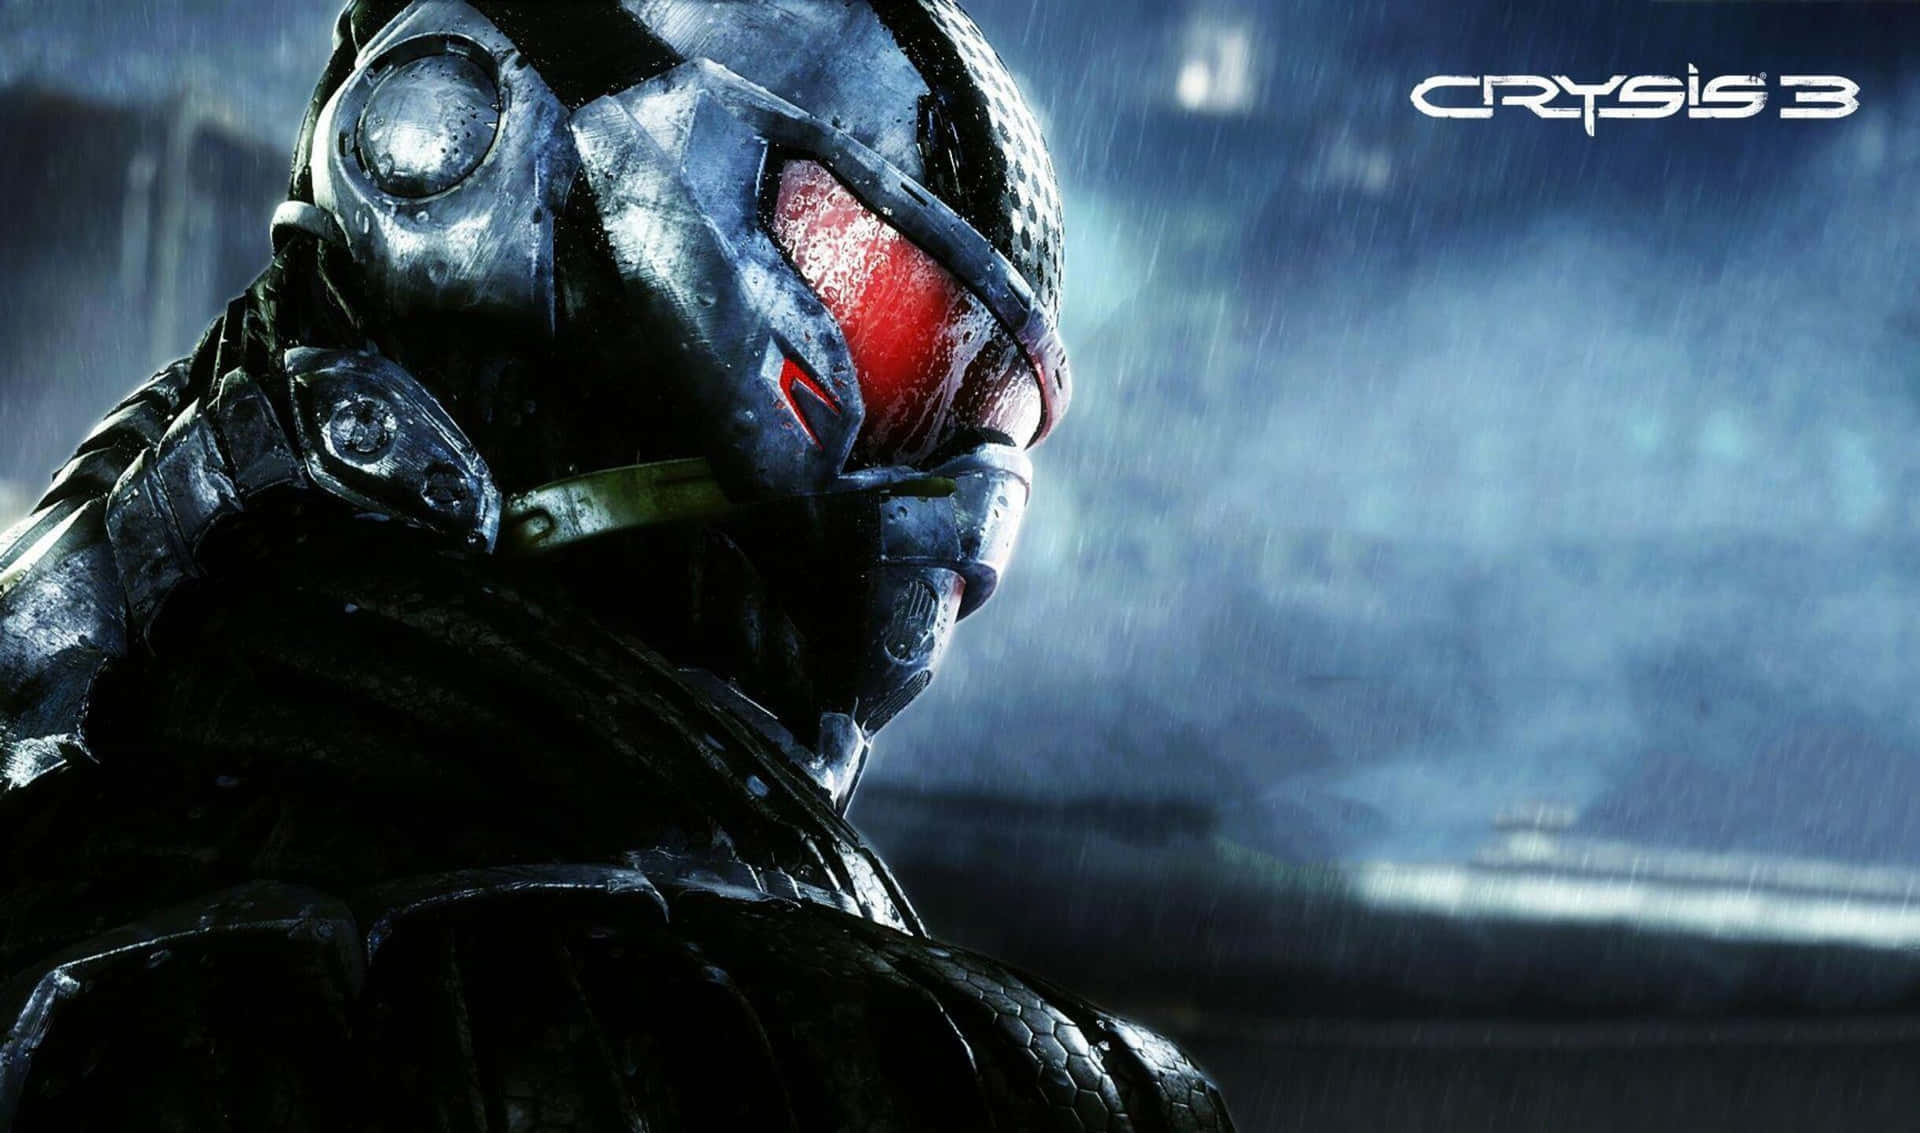 Crysis 3 Wallpapers - Hd Wallpapers